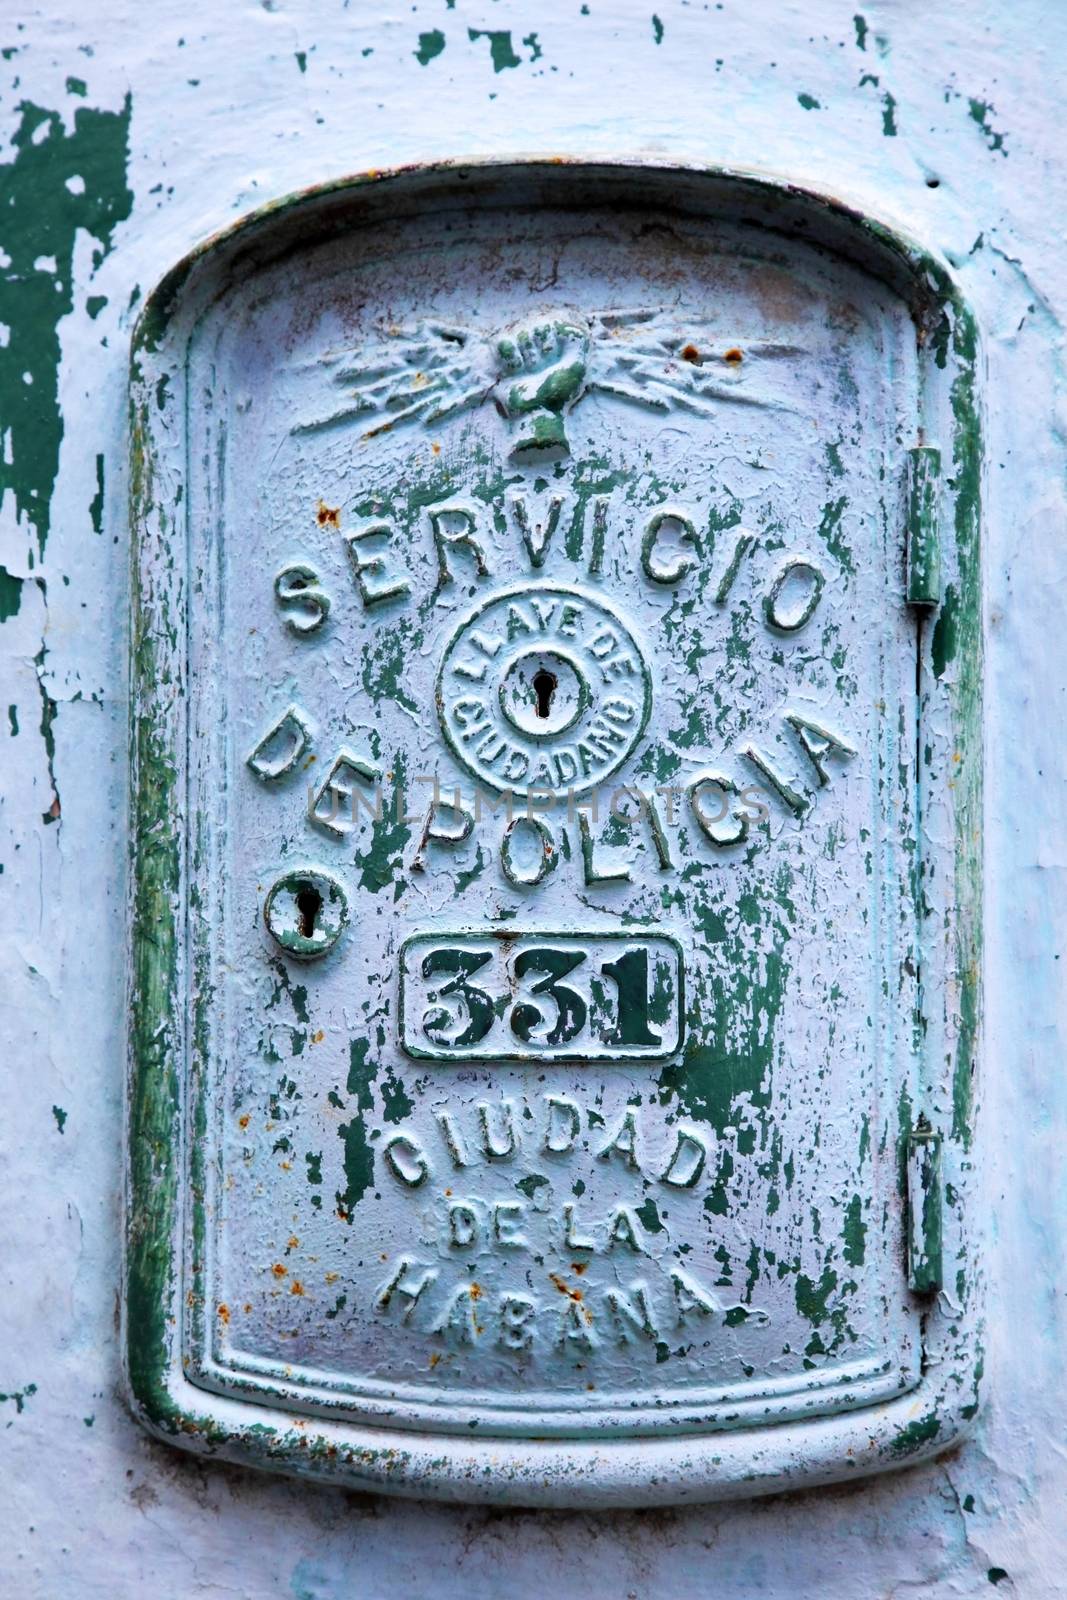 Shows an emergency call box in Havana by friday